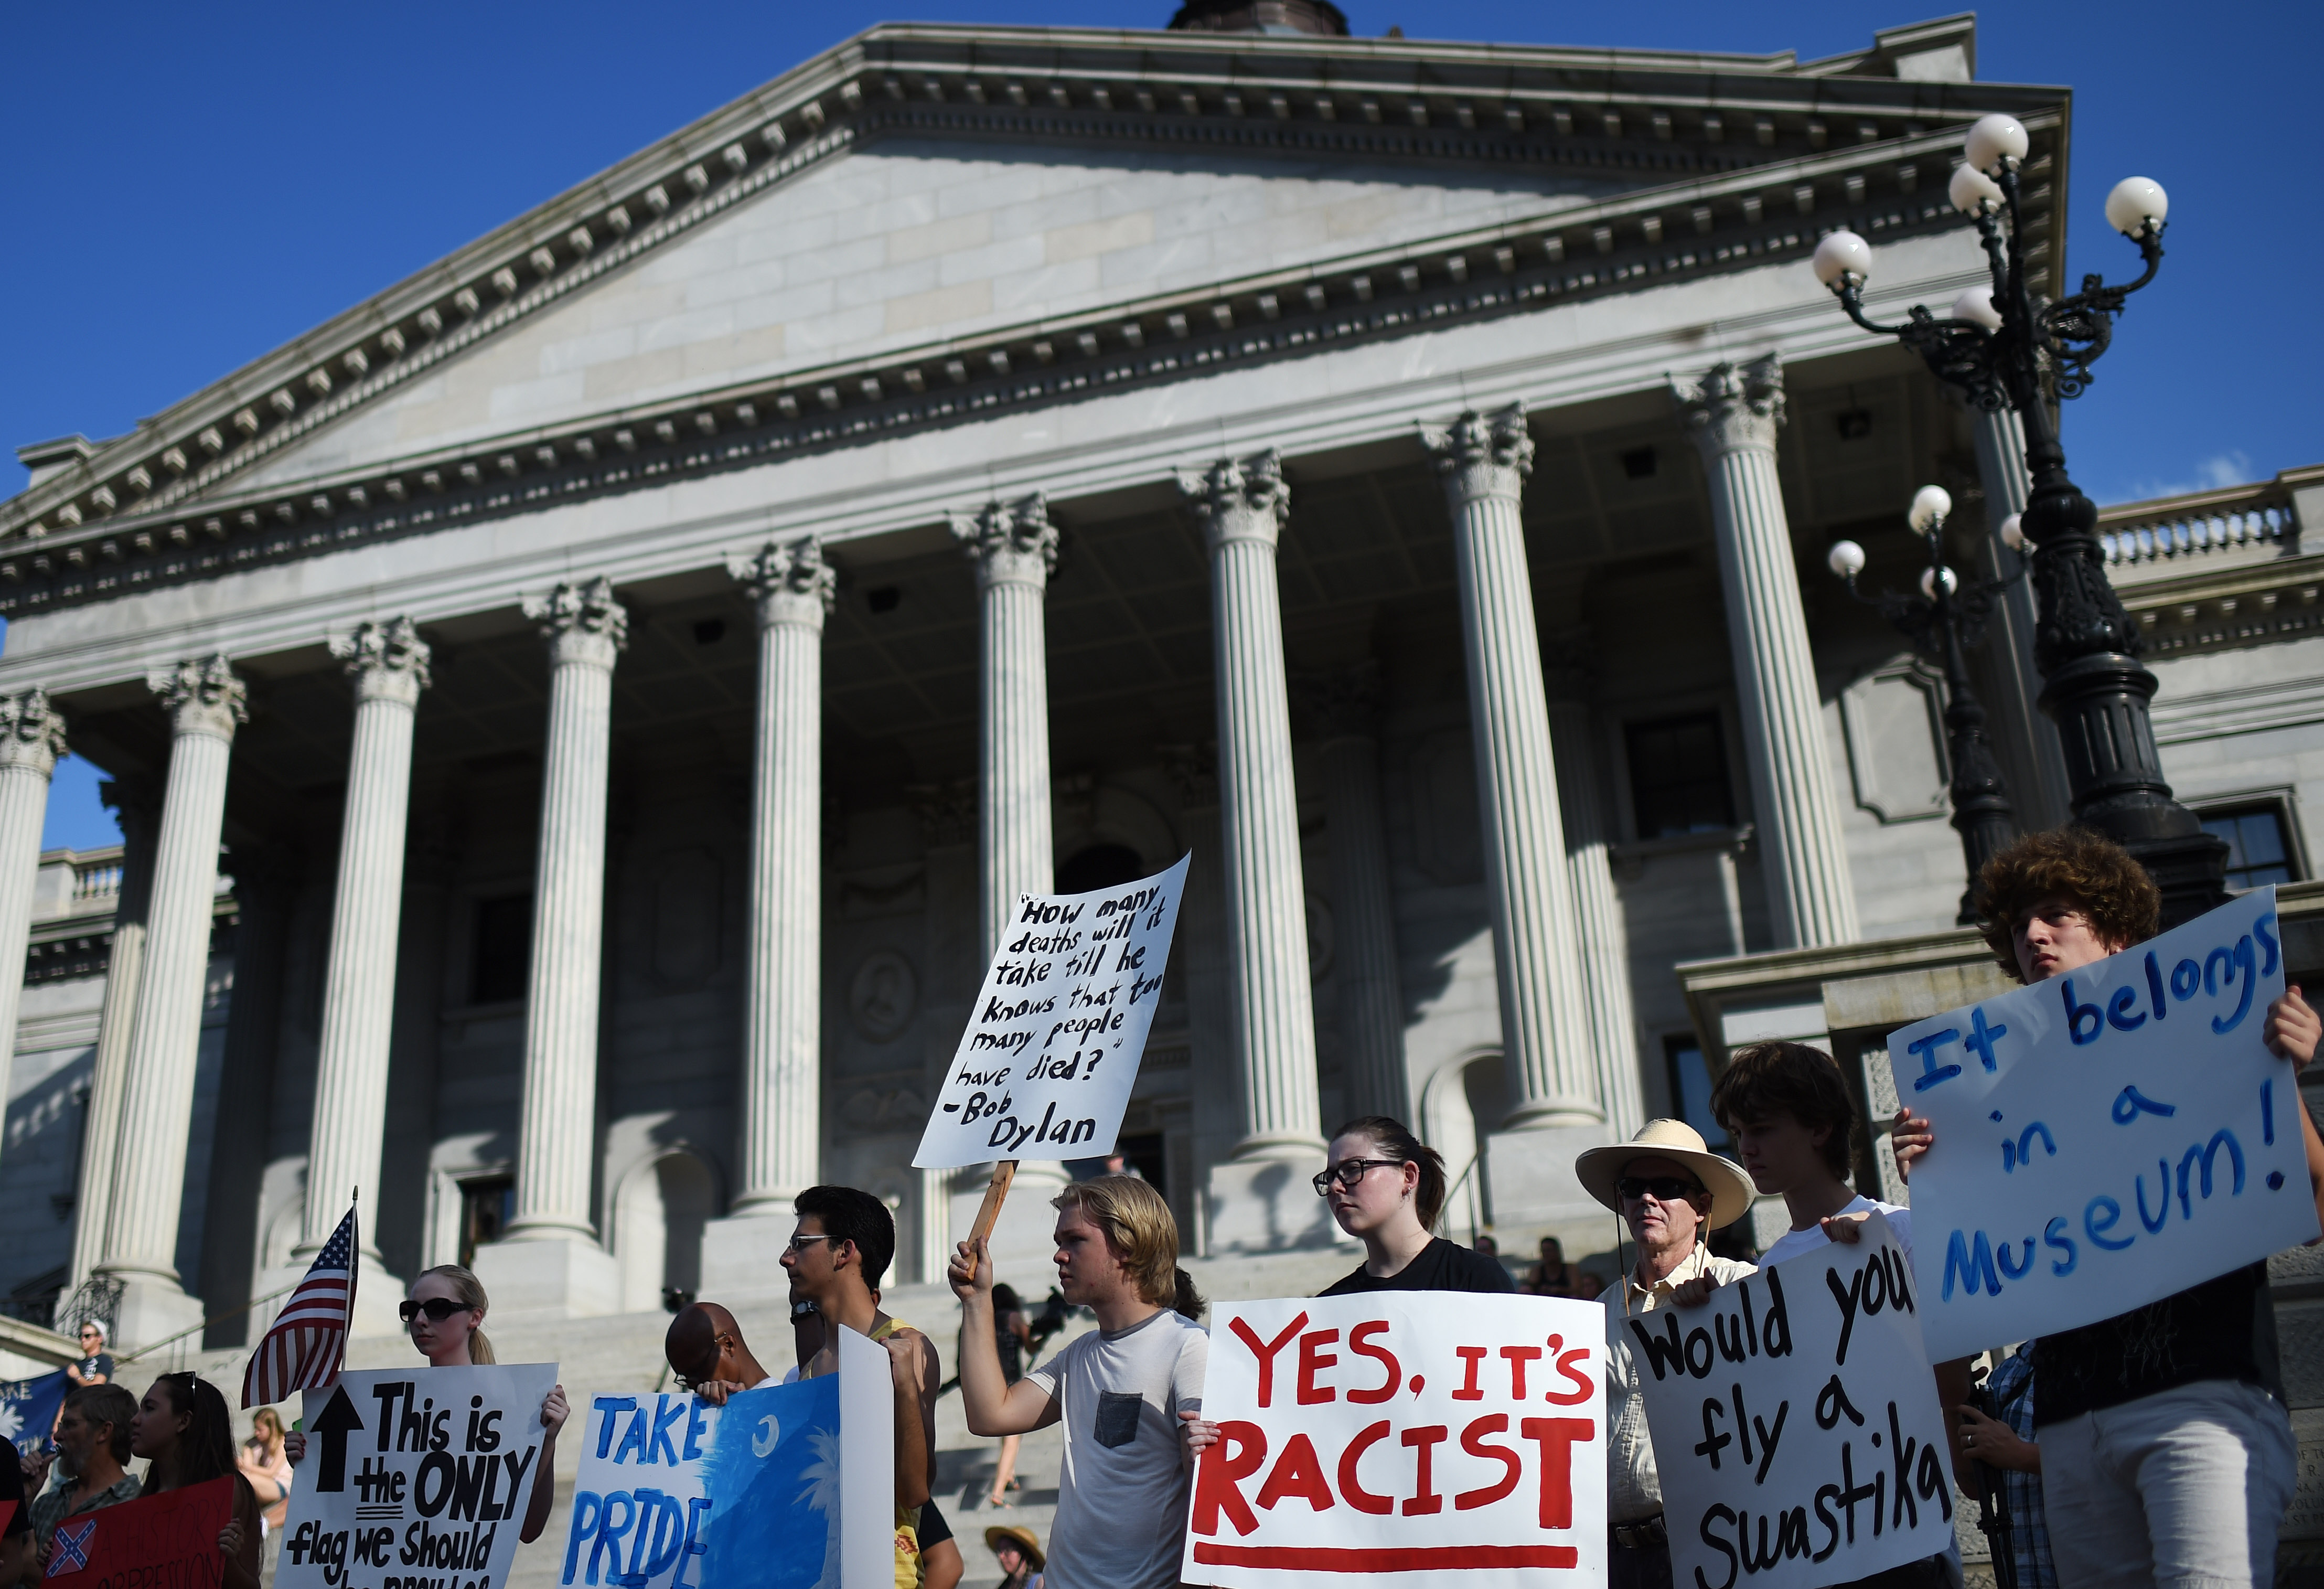 Protesters stand on the South Carolina Statehouse steps during a rally to take down the Confederate flag, Saturday, June 20, 2015, in Columbia, S.C. Rep. Doug Brannon, R-Landrum, said it's past time for the Confederate flag to be removed from South Carolina's Statehouse grounds after nine people were killed at the Emanuel A.M.E. Church shooting. (AP Photo/Rainier Ehrhardt)